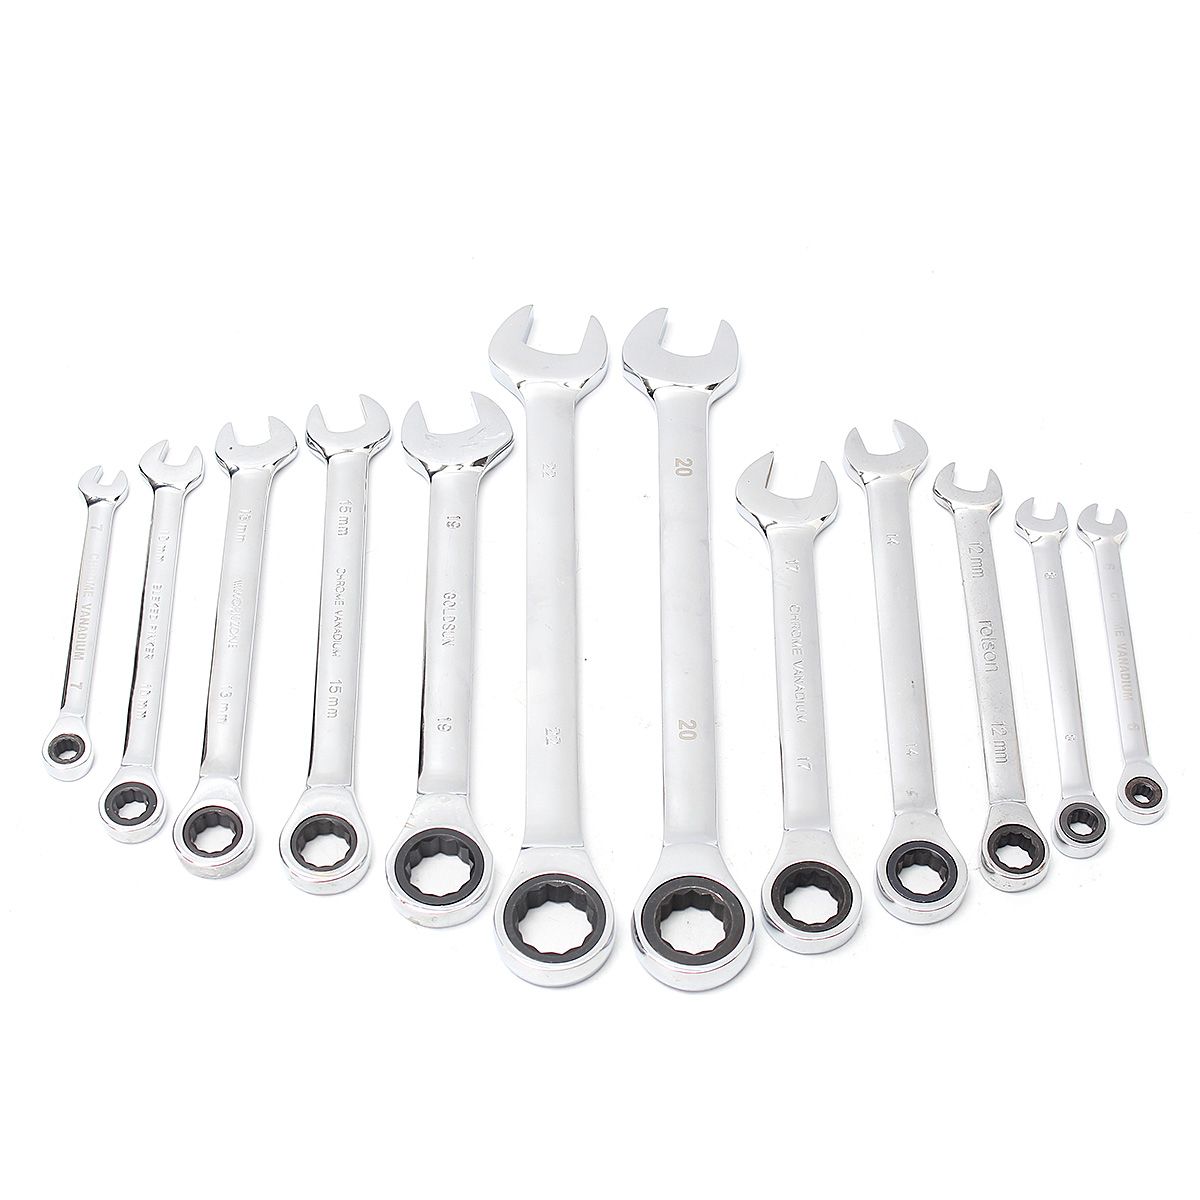 72-Teeth-Chrome-Vanadium-Steel-Fixed-Head-Ratchet-Spanner-Wrench-Open-End-Ring-Tool-1147184